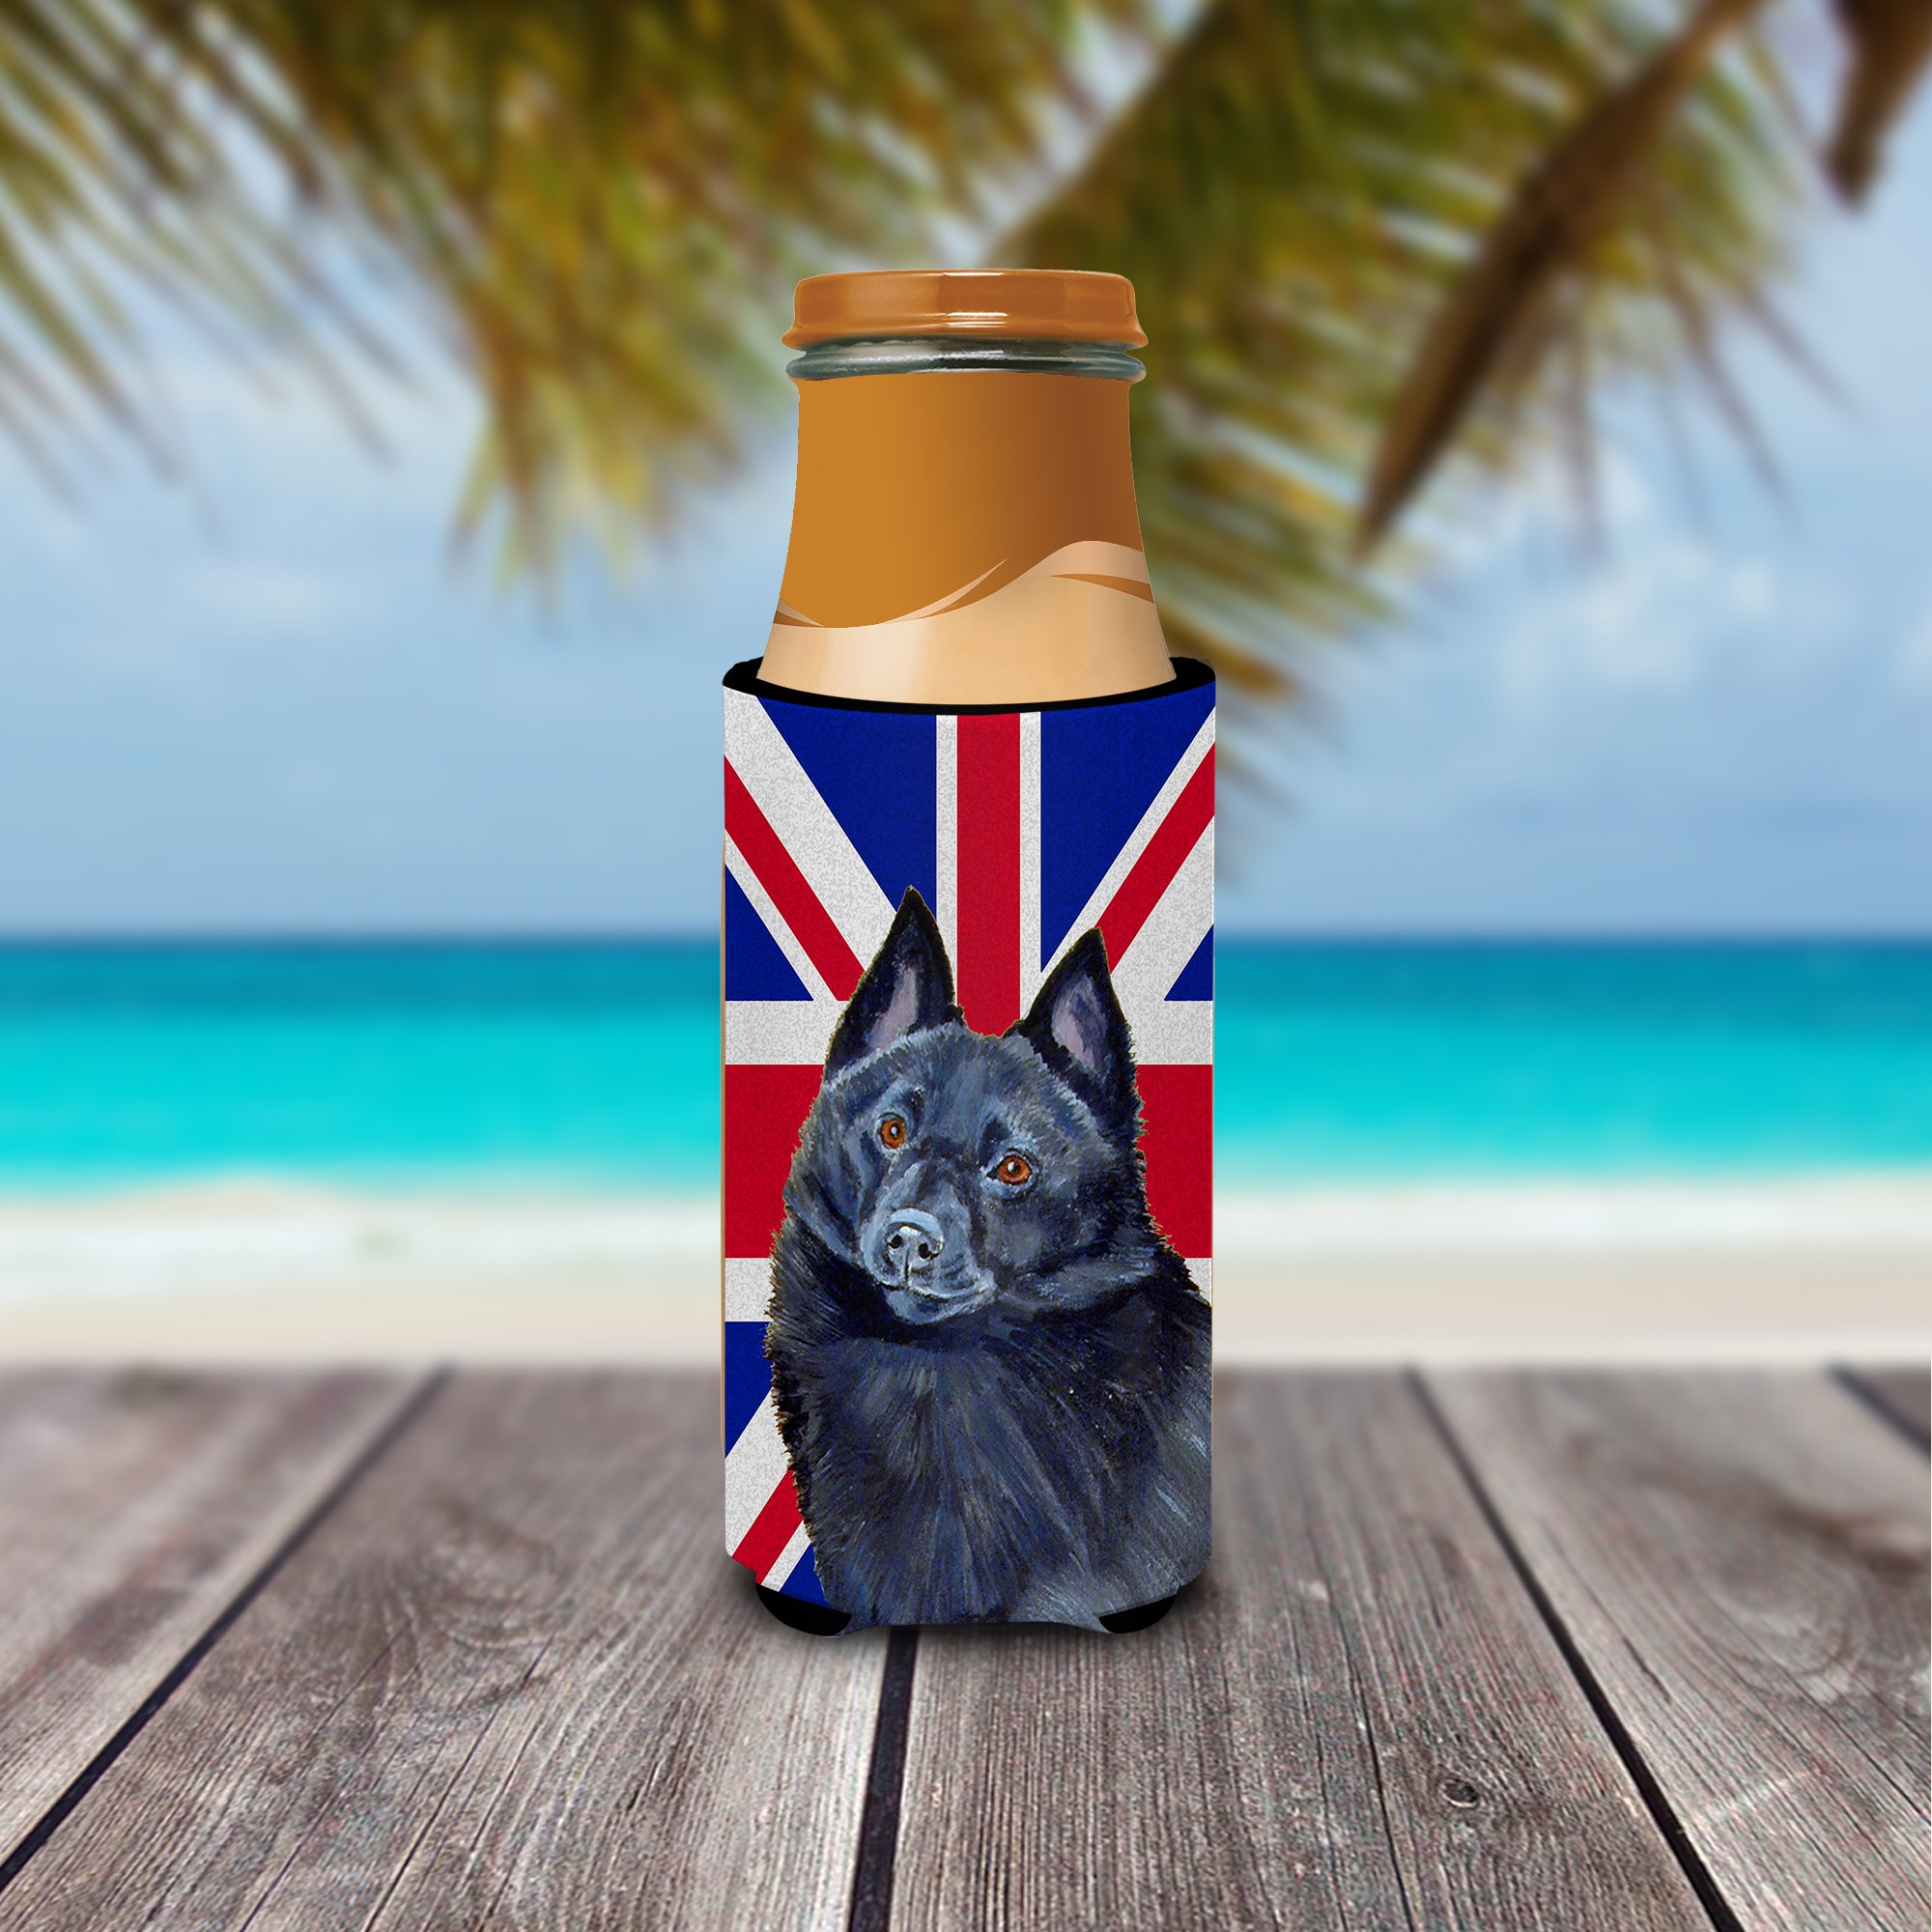 Schipperke with English Union Jack British Flag Ultra Beverage Insulators for slim cans LH9491MUK